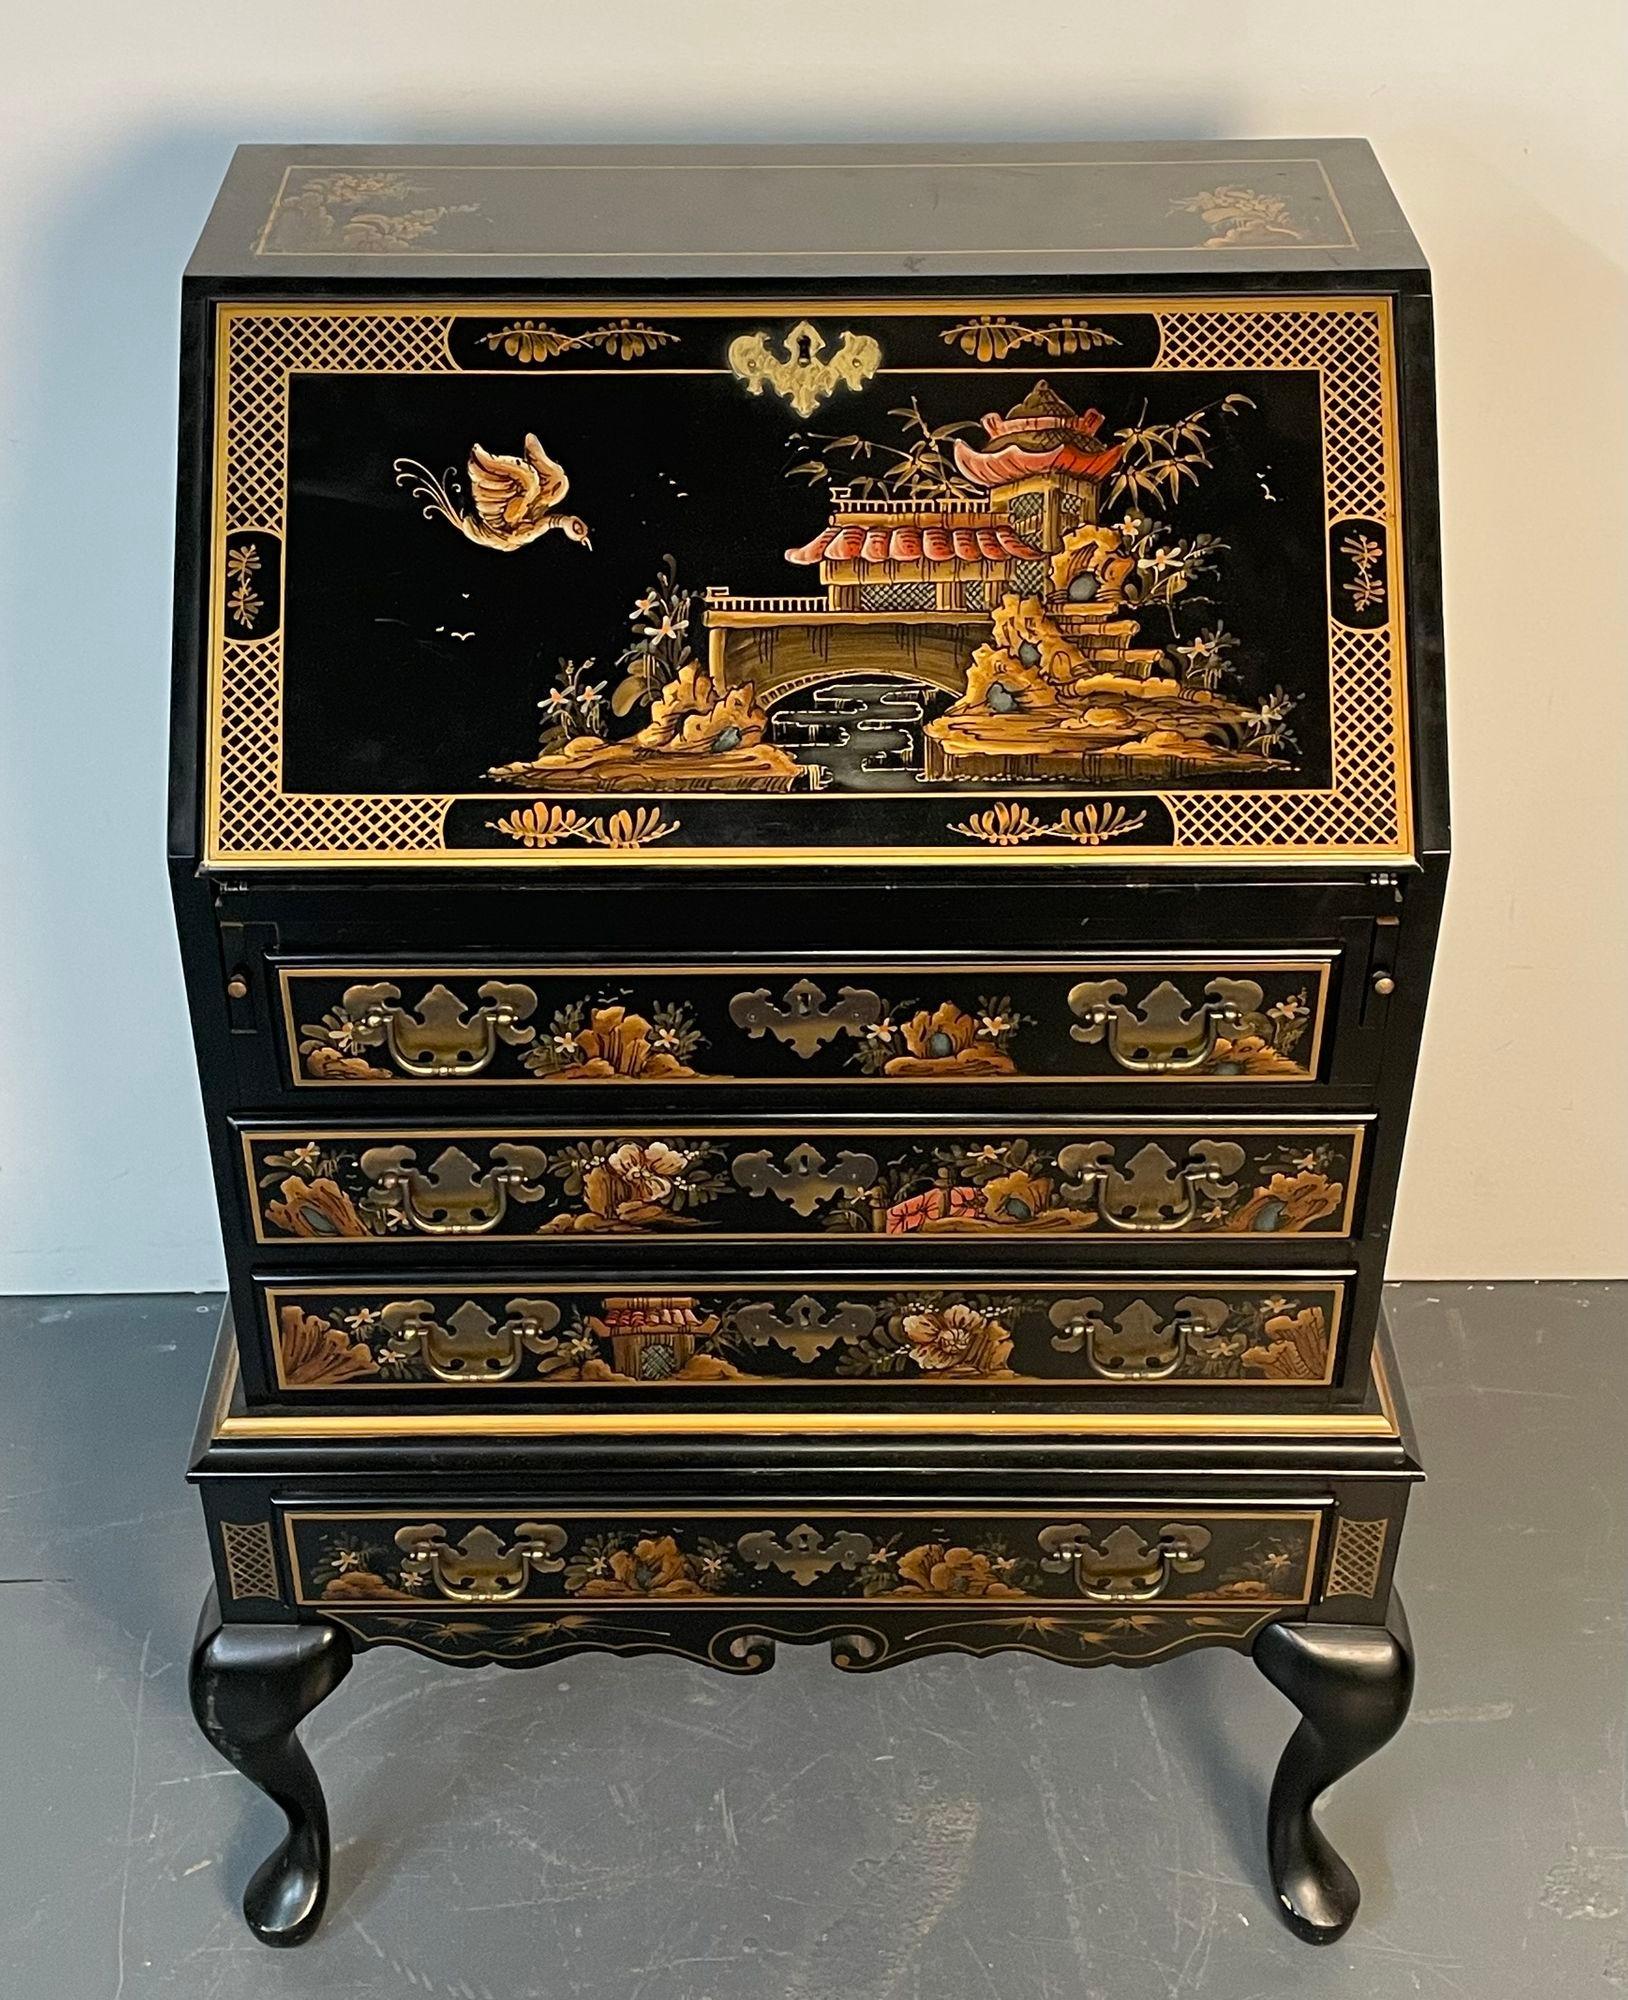 Chinoiserie Slant Front Writing Desk / Cabinet, Chinese Motif
A Decorative Slat Front Desk in the Chinoiserie Style on Queen Anne Legs which support a lower commode of four drawers leading to a drop down large writing surface with a fitted interior